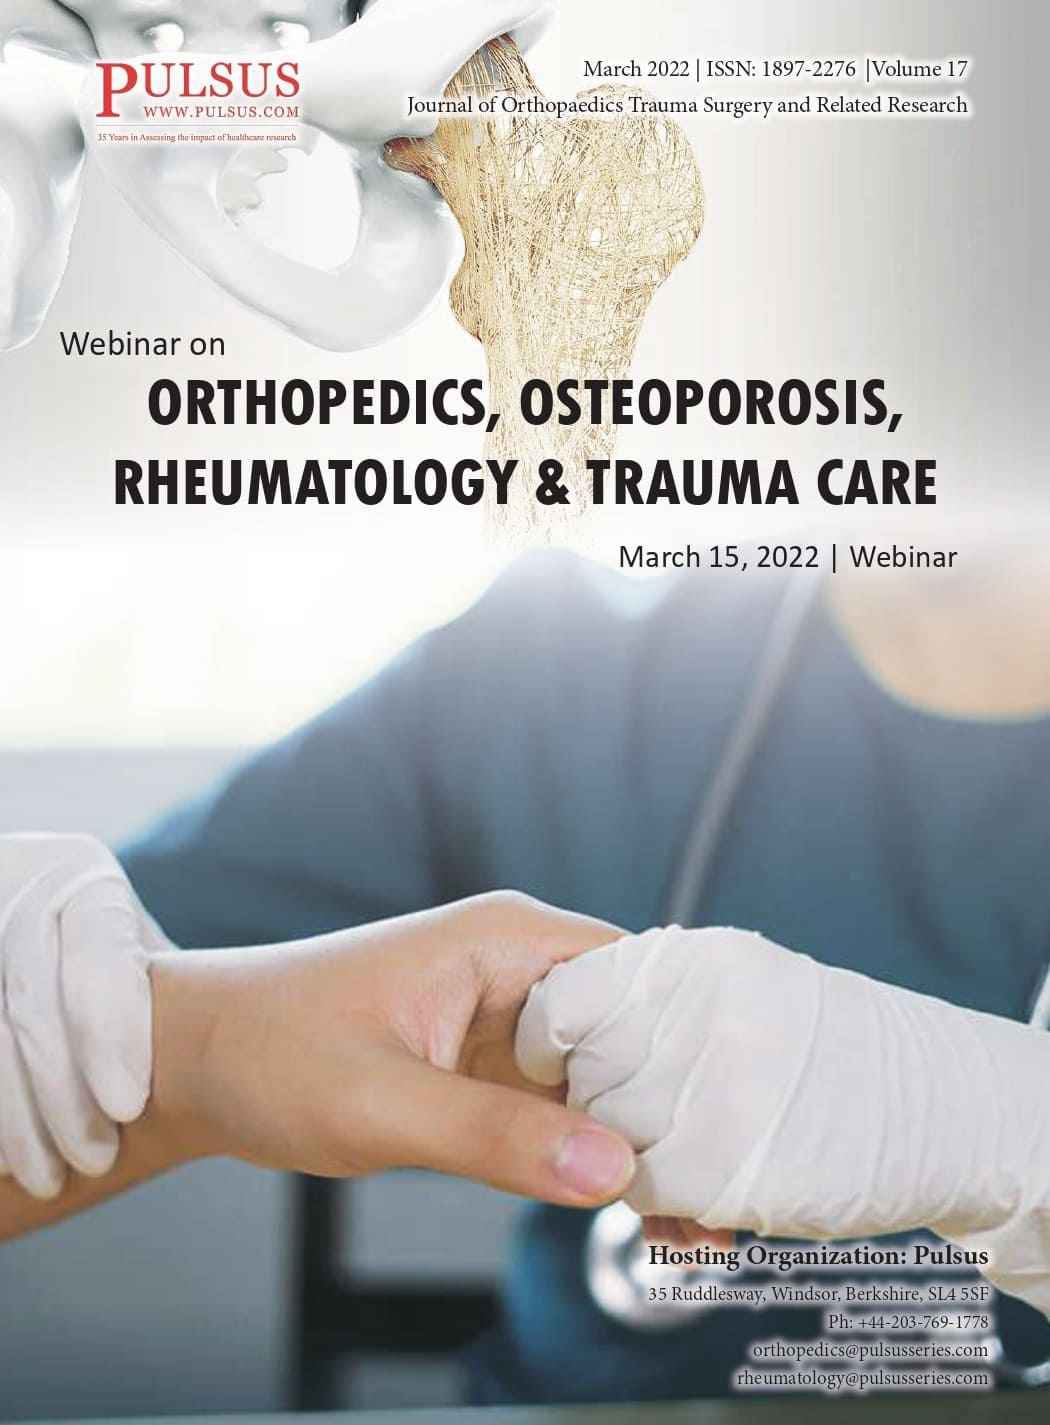 https://www.jotsrr.org/conference-abstracts/ortc-2022-proceedings.html